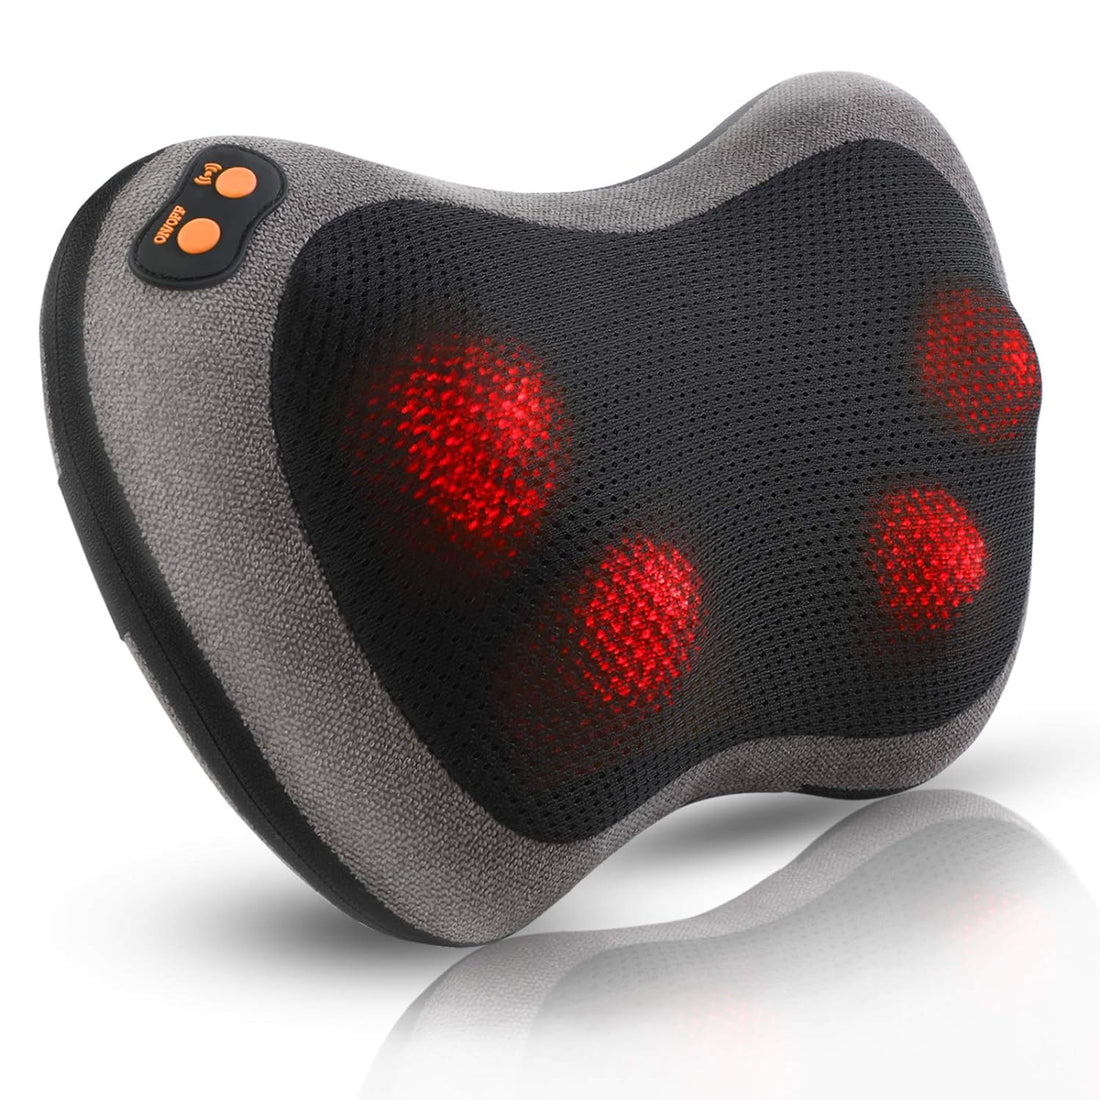 Shiatsu Neck Back Massager Kneading Massage Pillow With Heat for Back, Neck, Lower Back and Shoulder Massager with 4 Heated Rollers Dust Proof Cover Storage Bag for Stress Relax at Home Office and Car